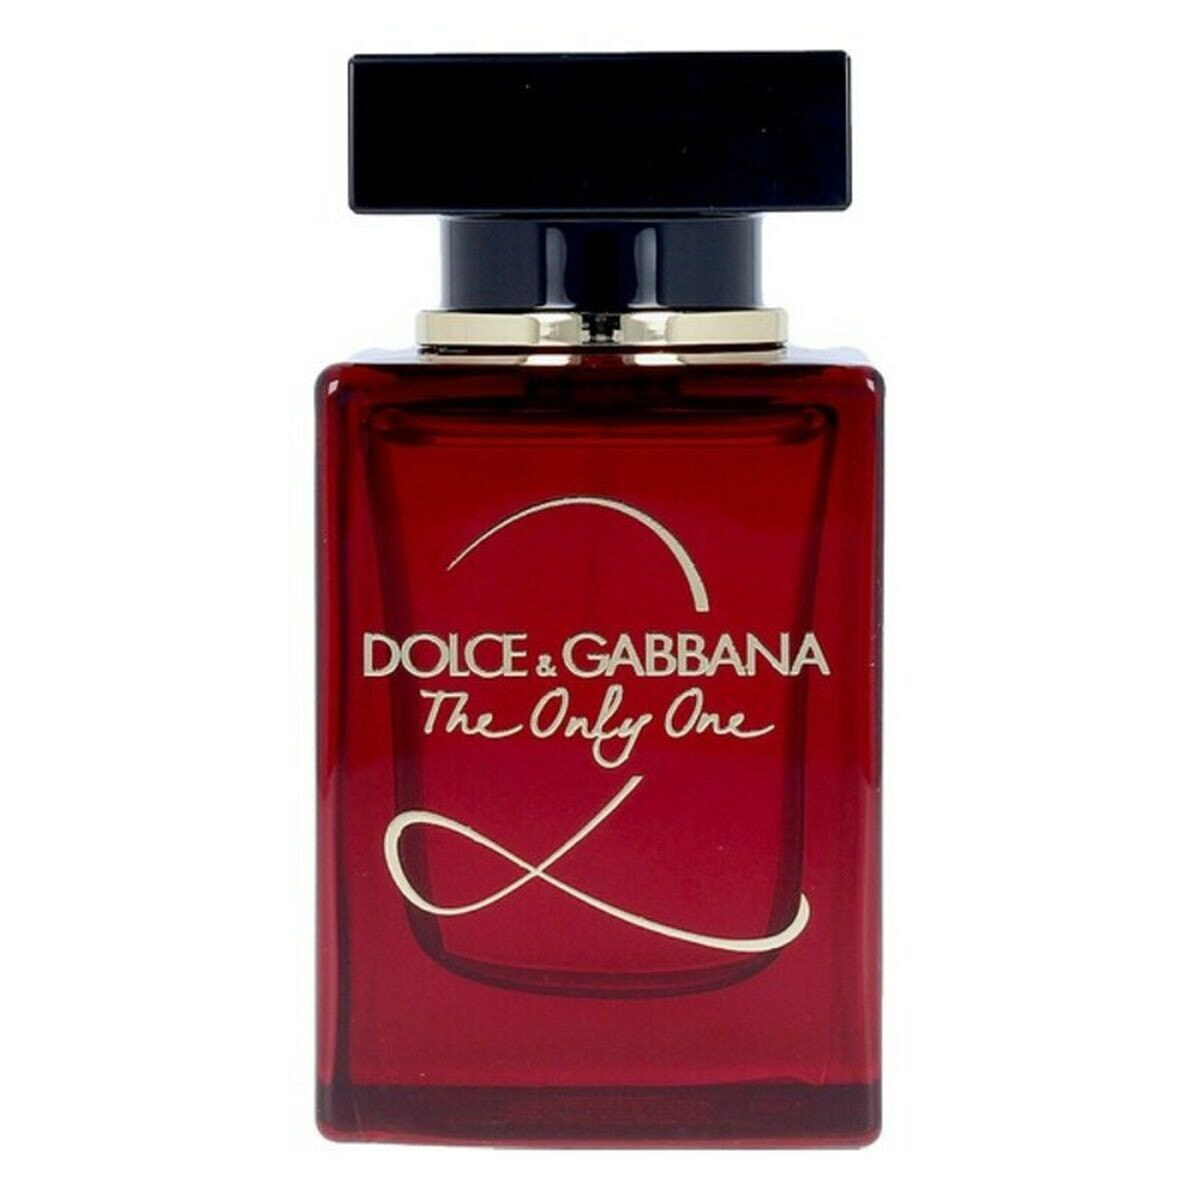 Gabbana the only one 2